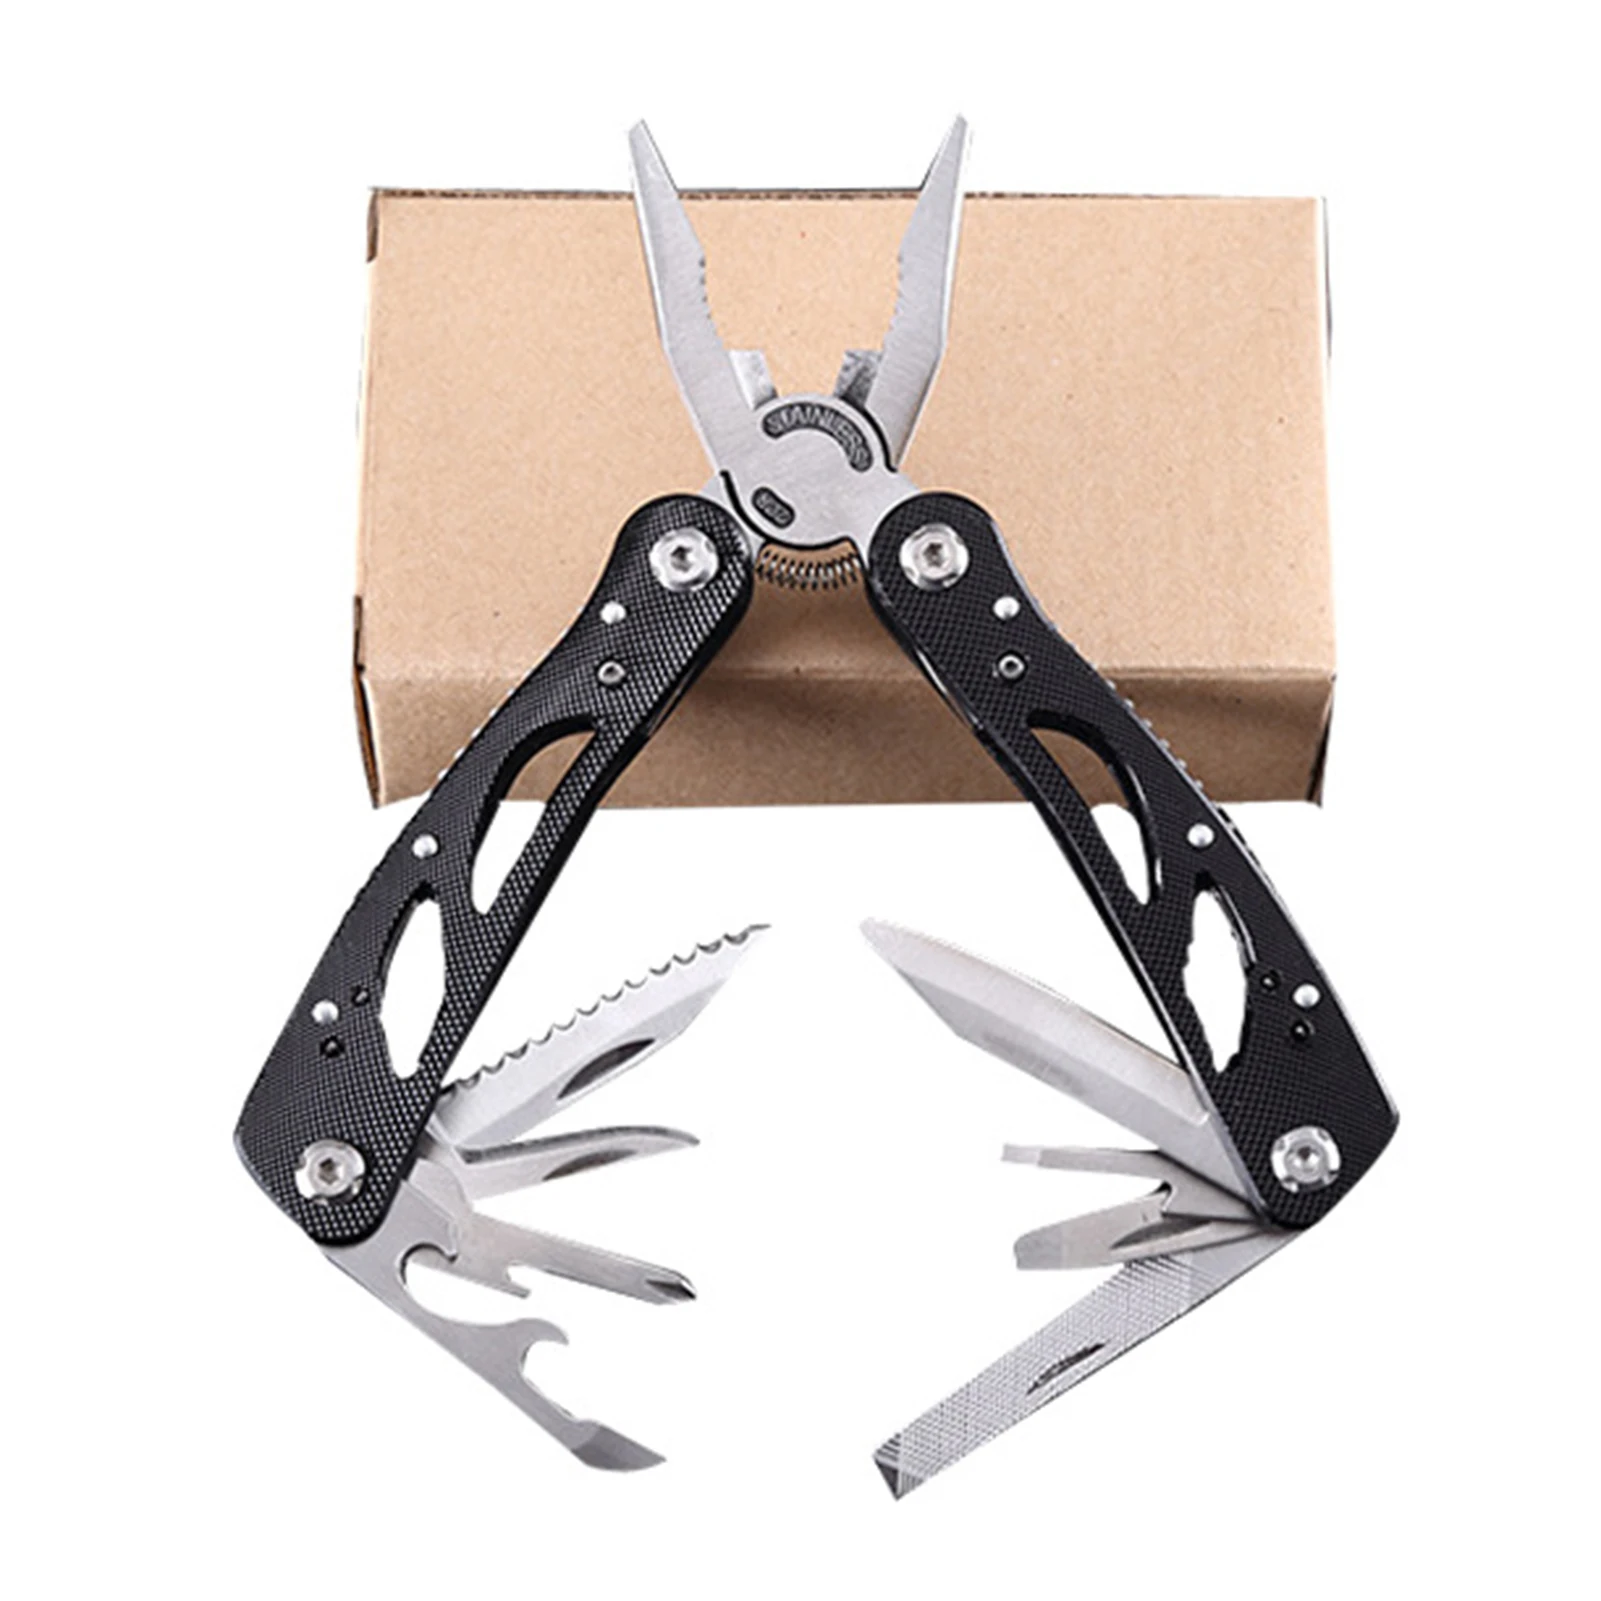 

Multi Purpose Folding Pocket Plier 12-in-1 Multitool Pliers Tool Hardened 420 Stainless Steel for Survival Camping Fishing